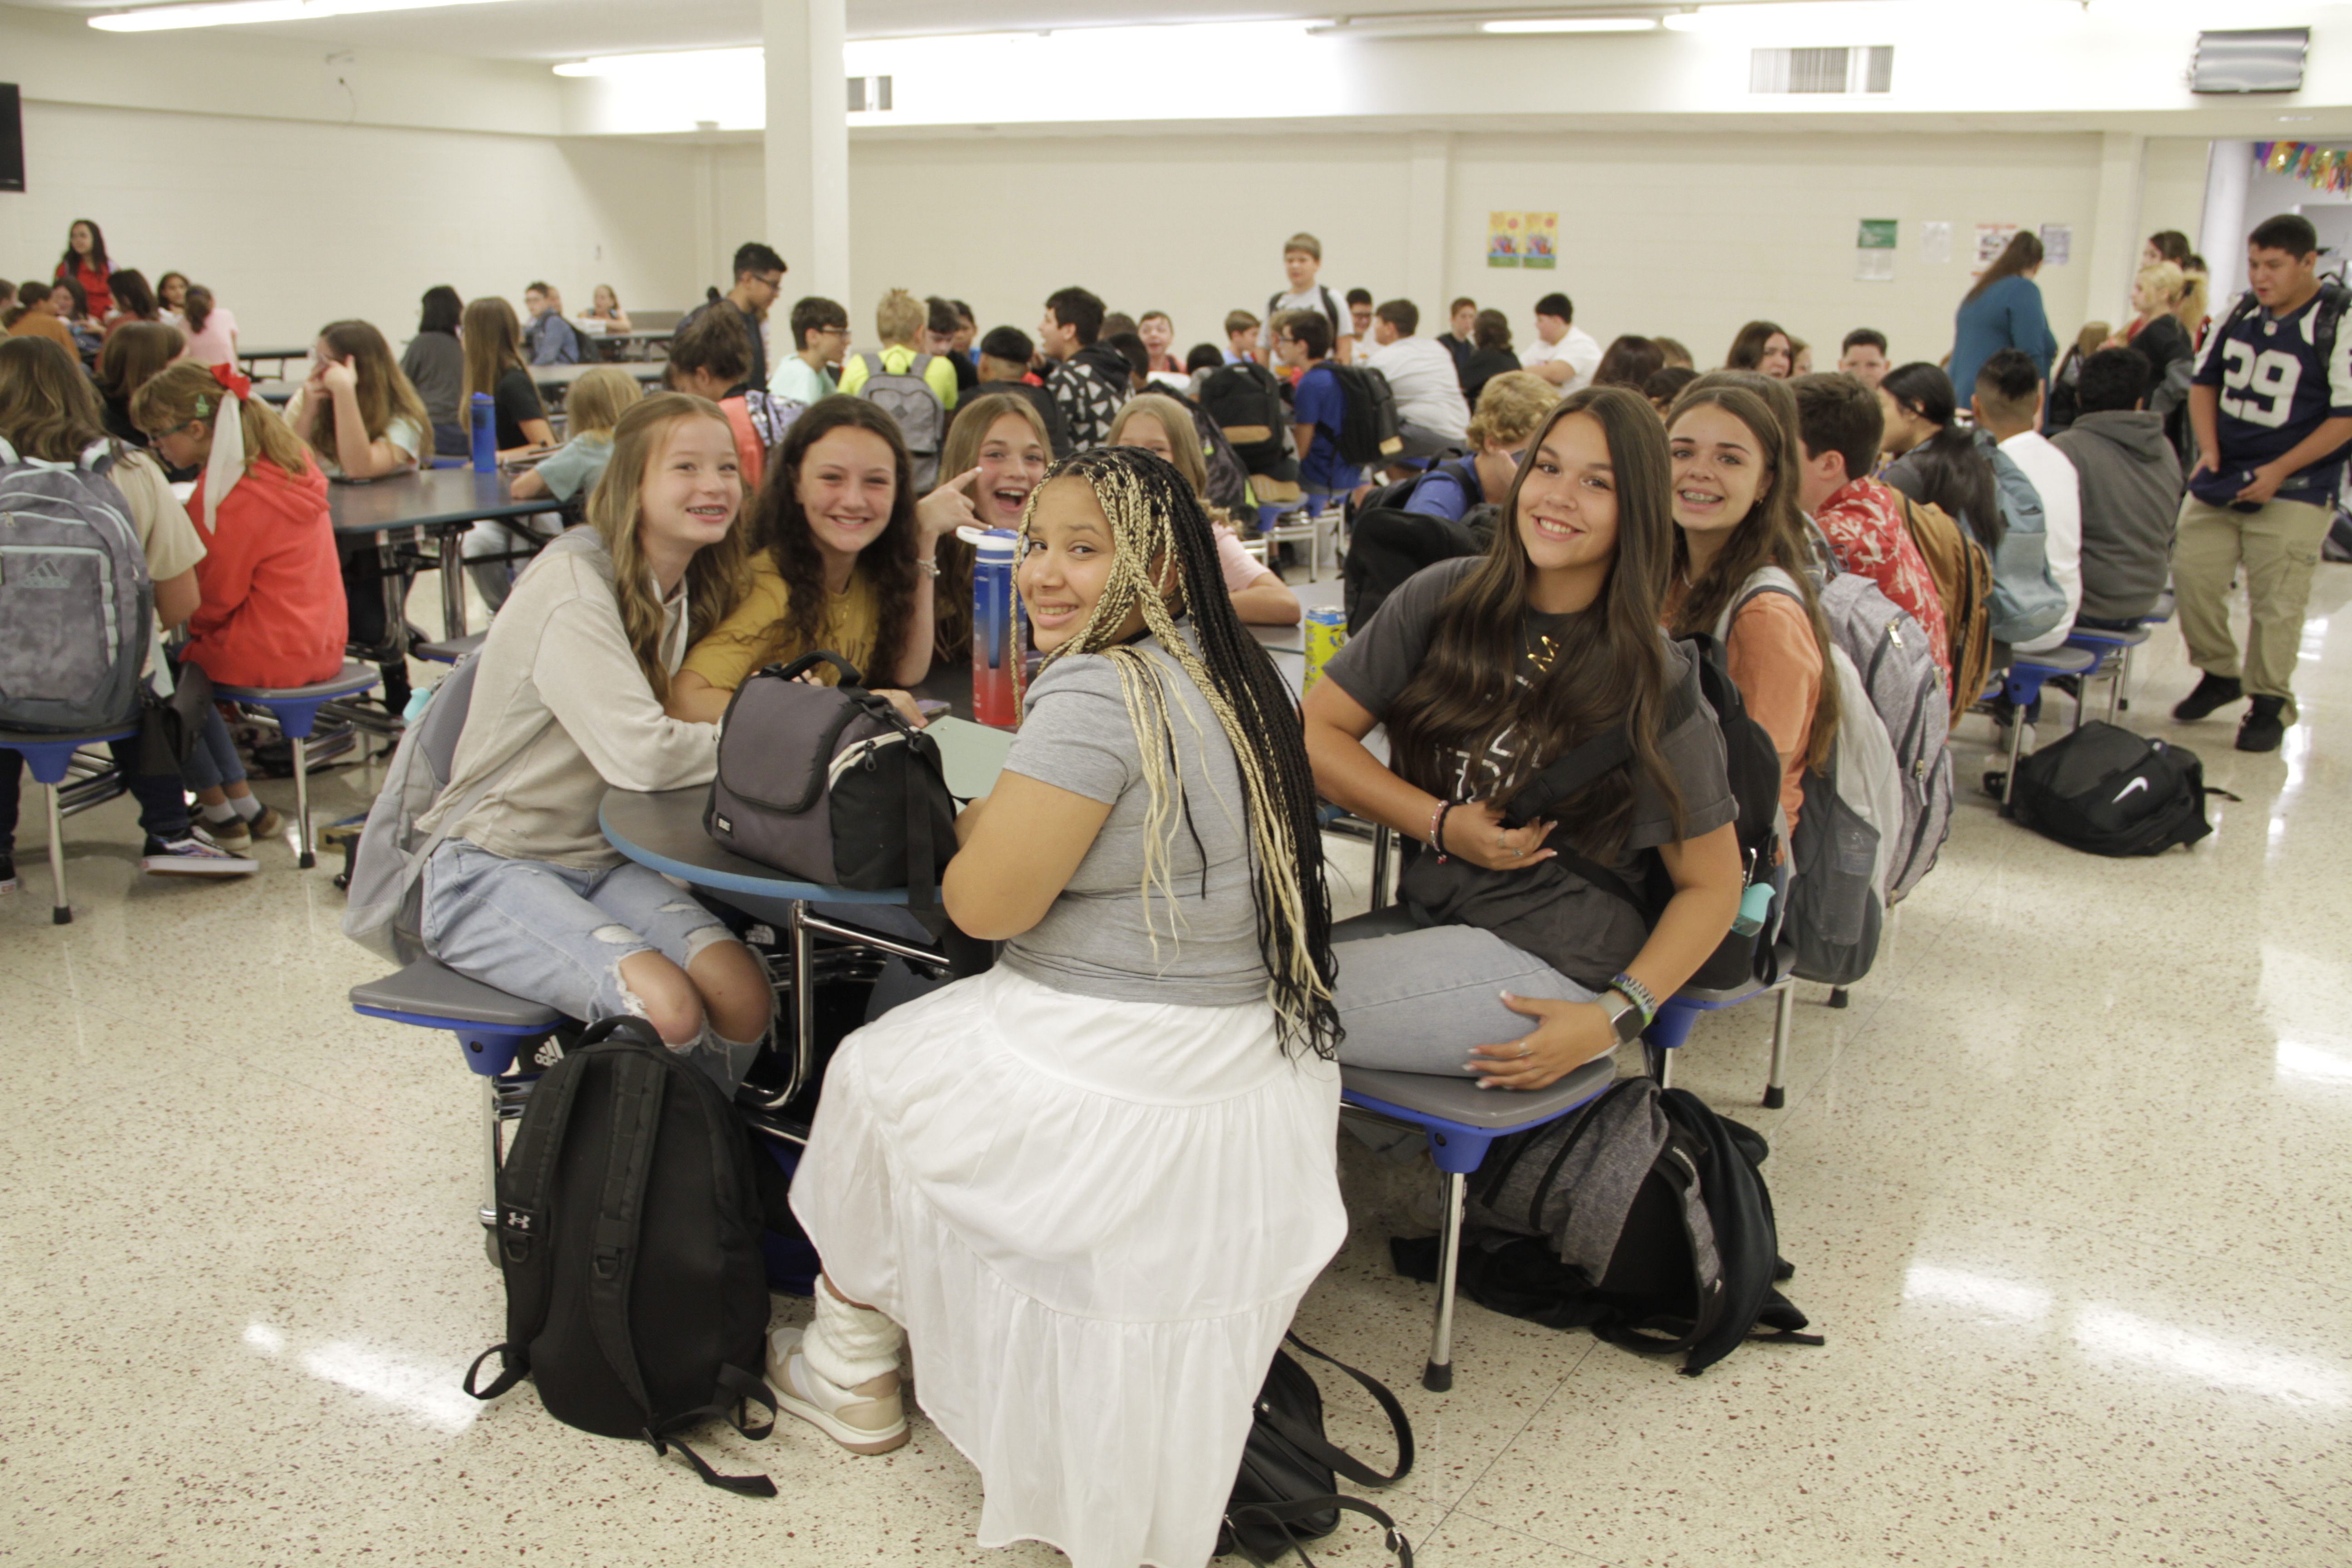 Students in cafeteria waiting for first bell